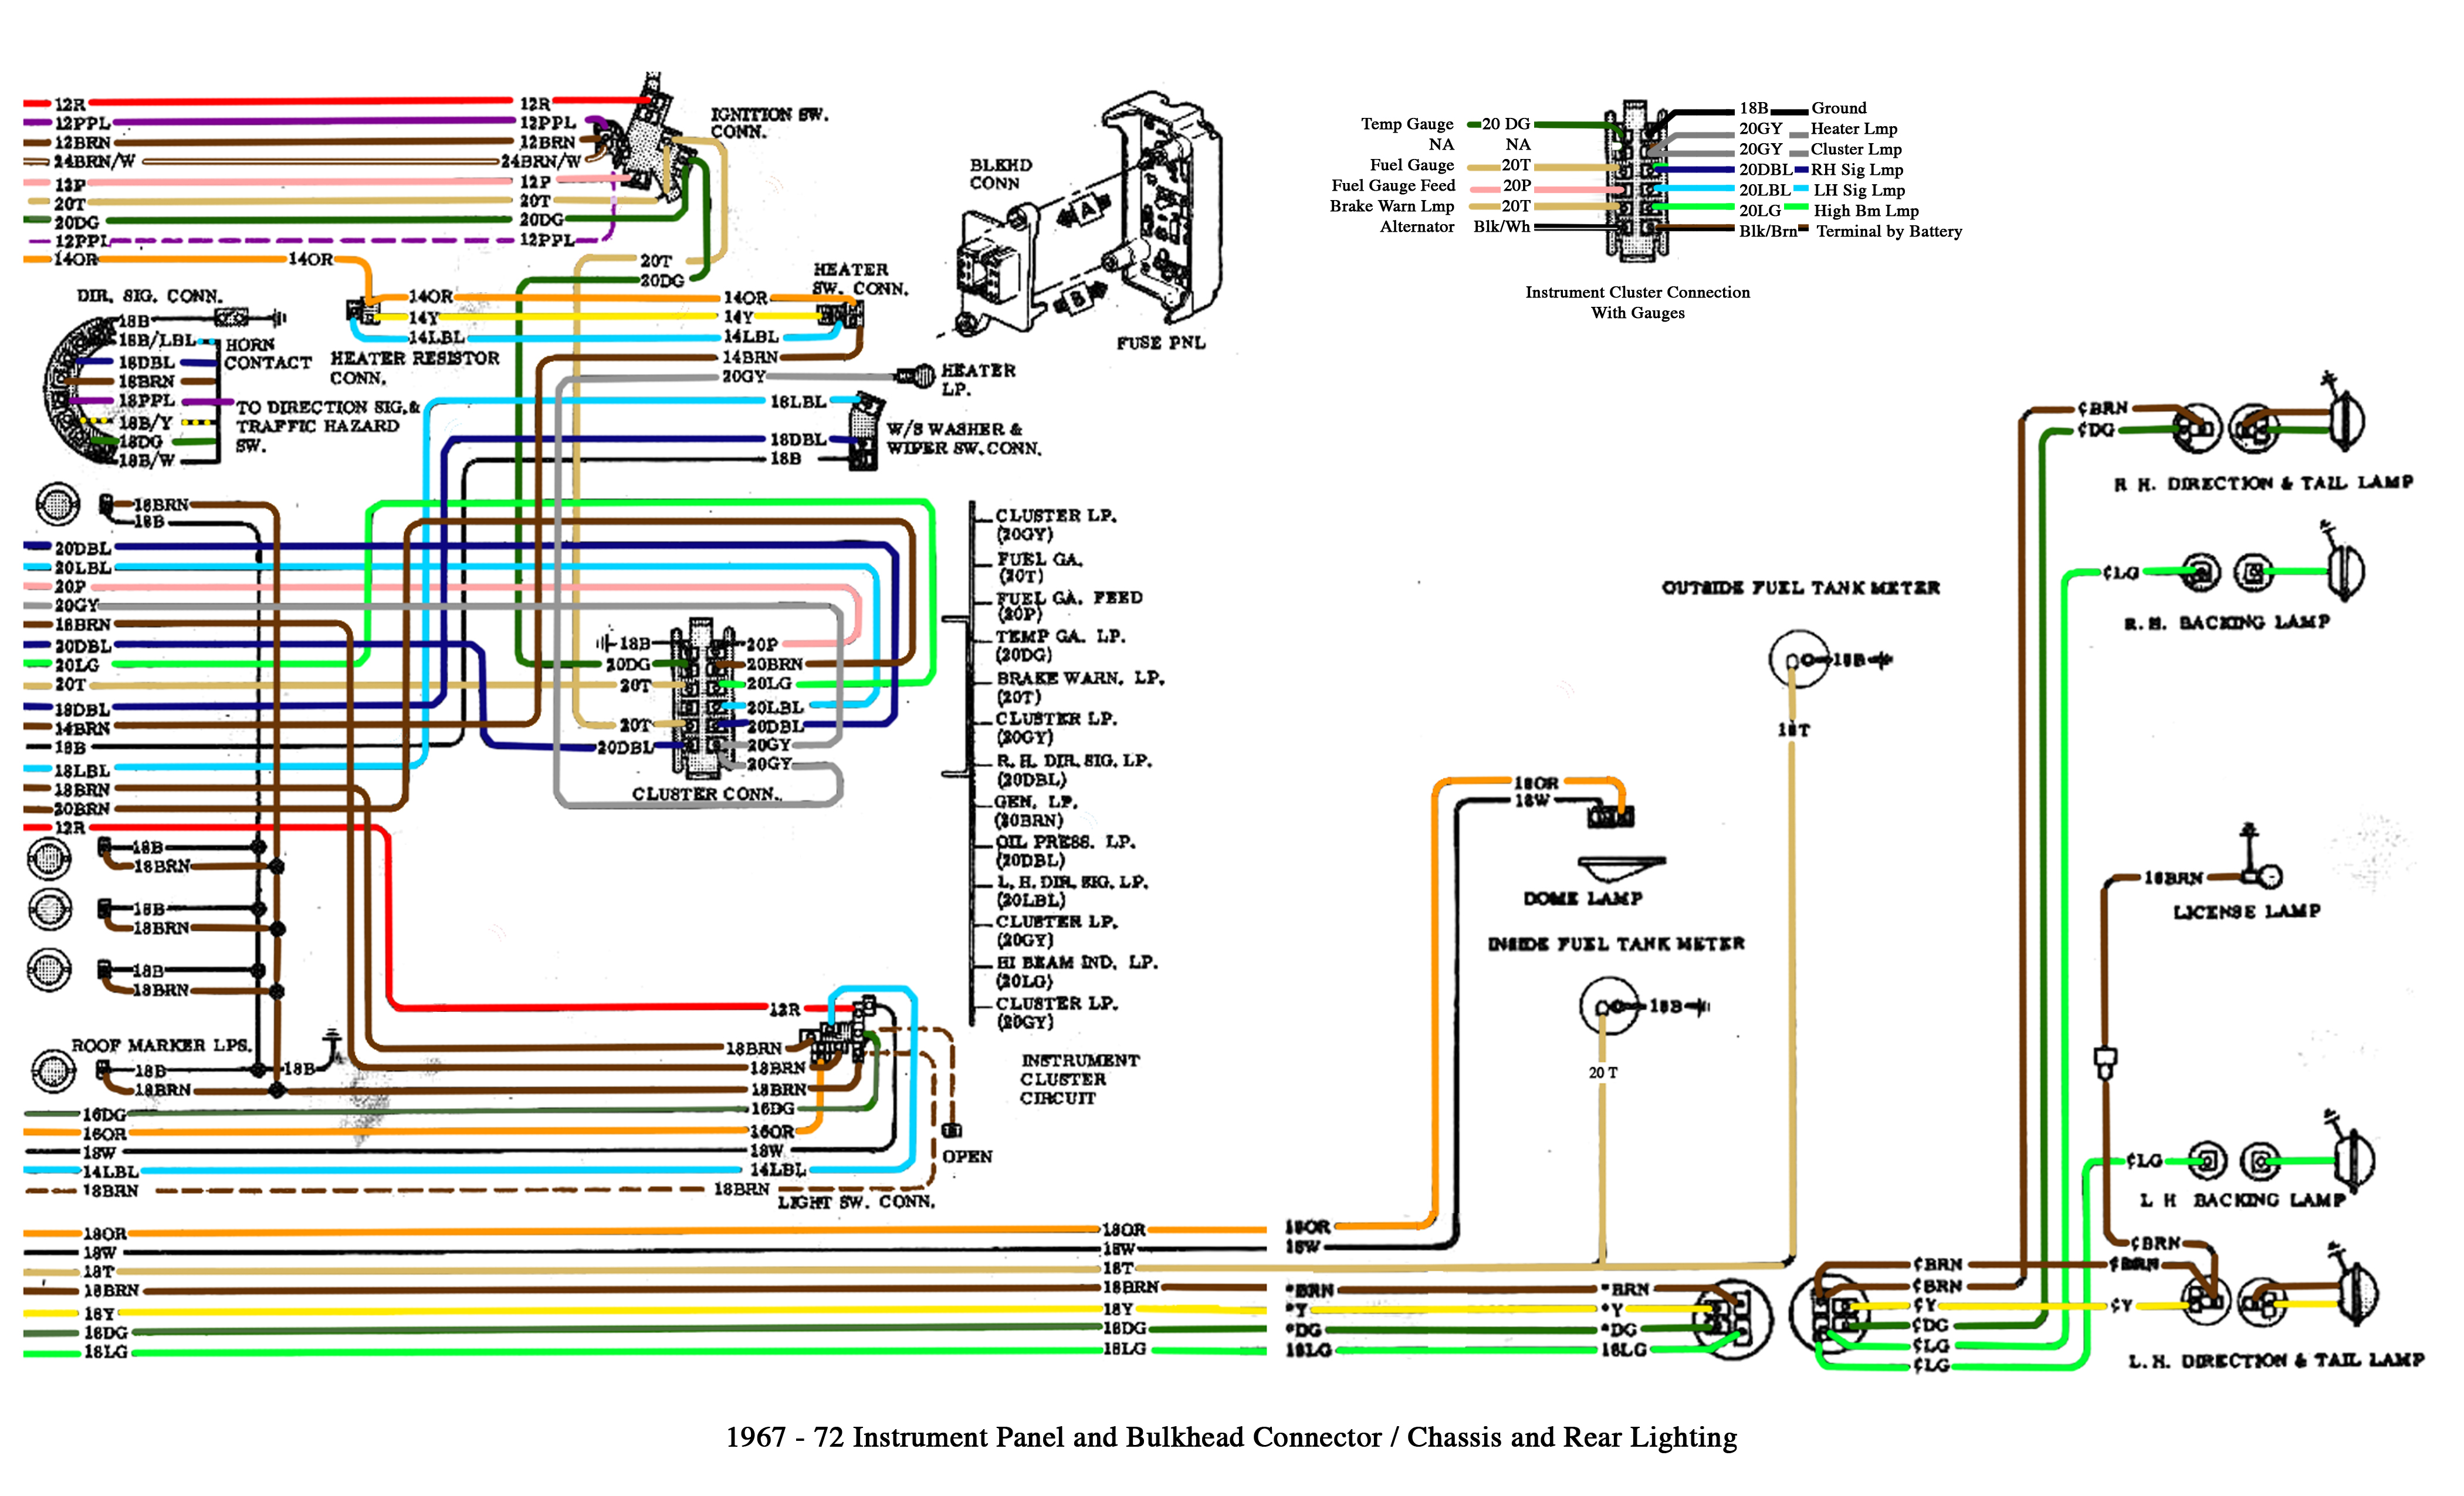 Color Wiring Diagram FINISHED - The 1947 - Present Chevrolet & GMC Truck  Message Board Network  1992 Chevy S10 Pickup Wiring Diagram    67-72 Chevy Trucks